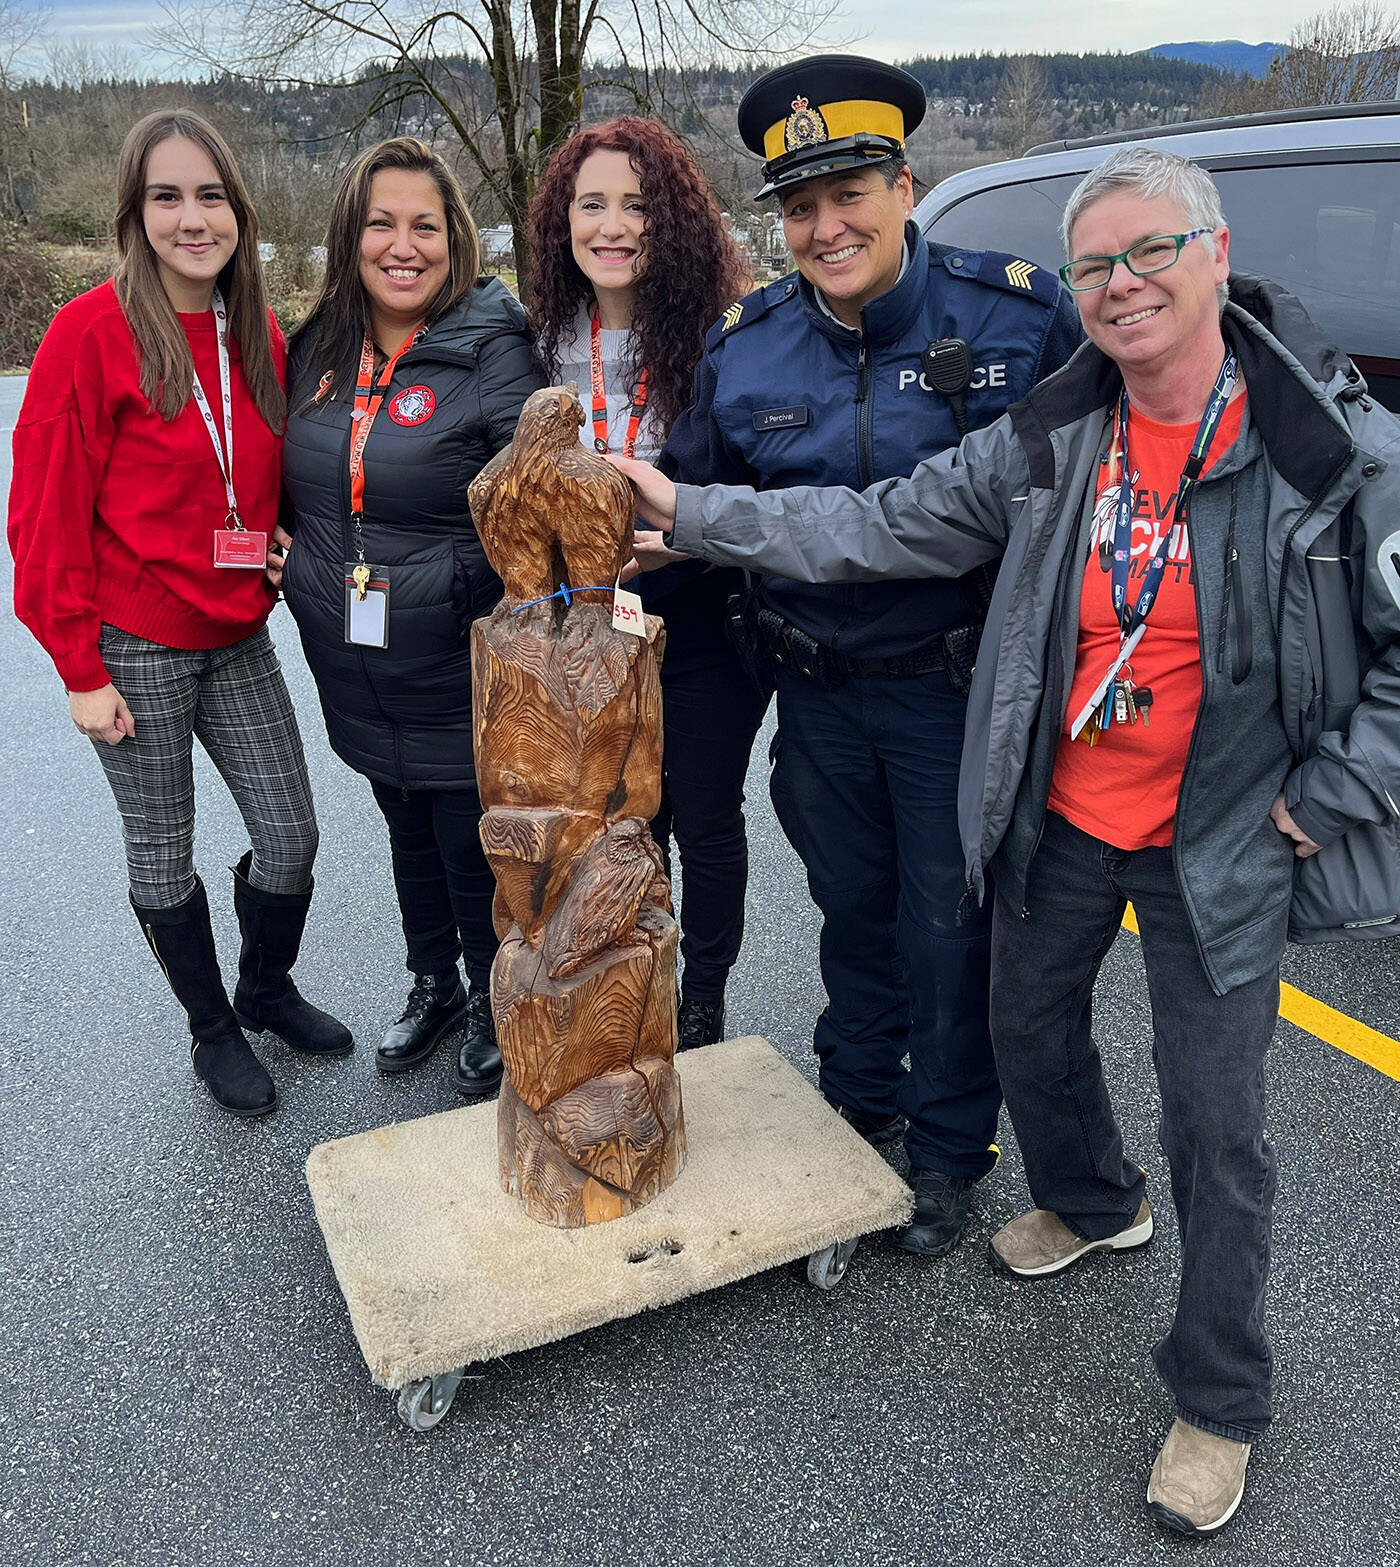 This carved figure was returned to kʷikʷəƛ̓əm (Kwikwetlem) First Nation on Jan. 9, 2023. It was stolen on Oct. 12, 2022 from Coquitlam and found in a basement suite in Chilliwack on Dec. 28, 2022. (RCMP)